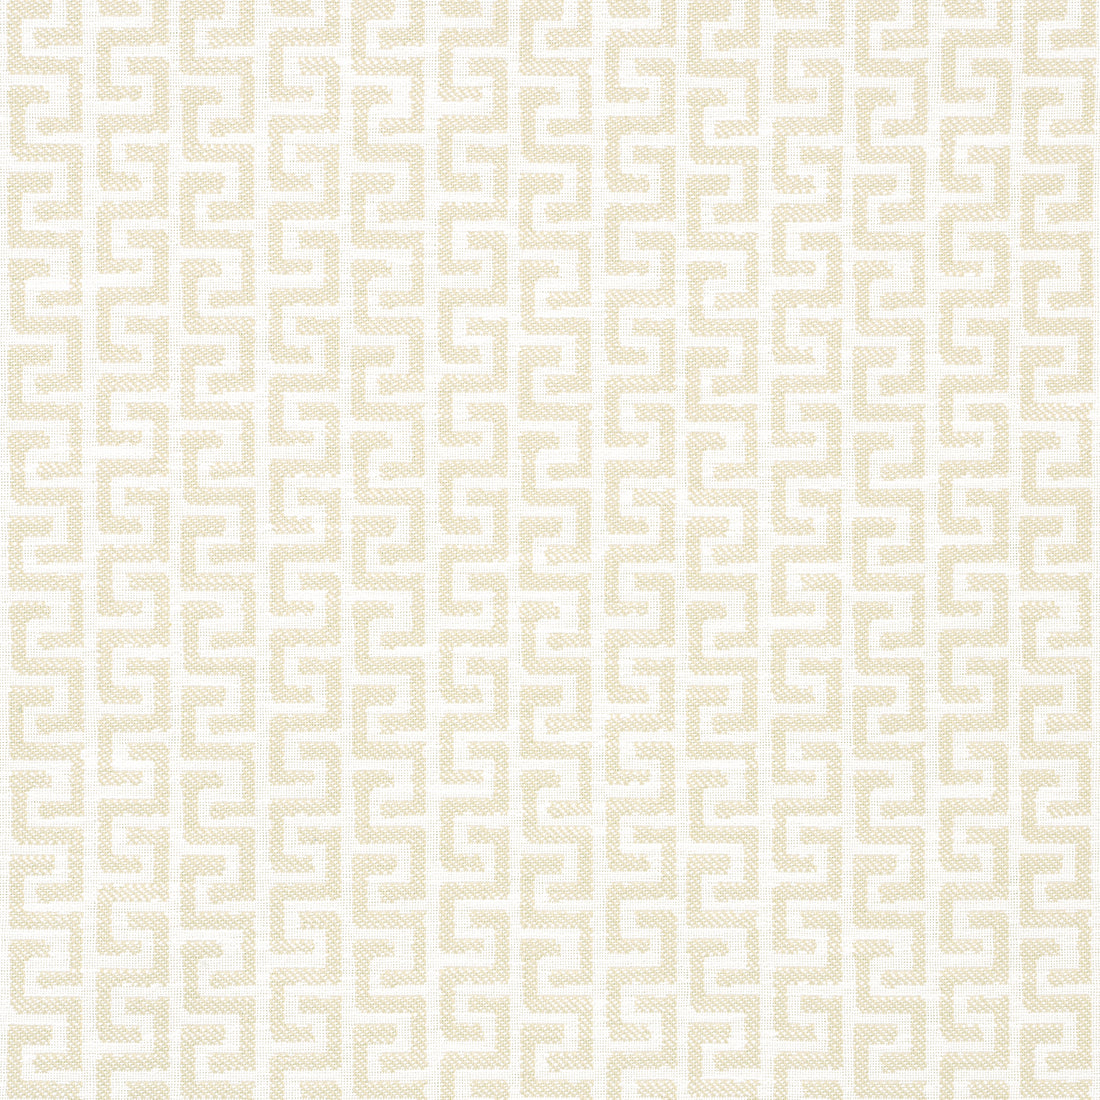 Merritt fabric in linen color - pattern number W74257 - by Thibaut in the Passage collection